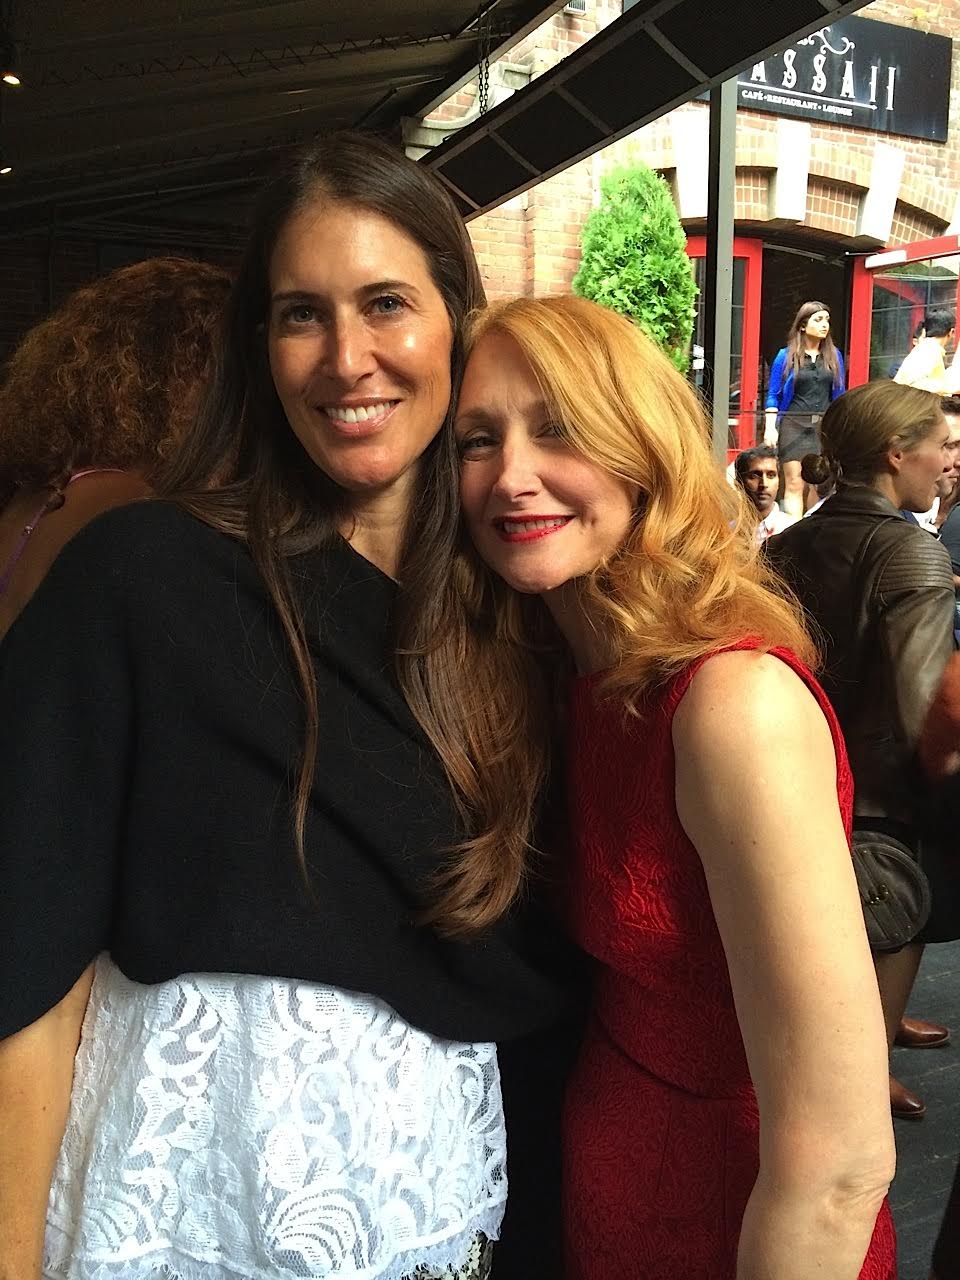 Producer Dana Friedman (Left) with Actress Patricia Clarkson (Right) at Toronto Intl. Film Festival with Learning to Drive